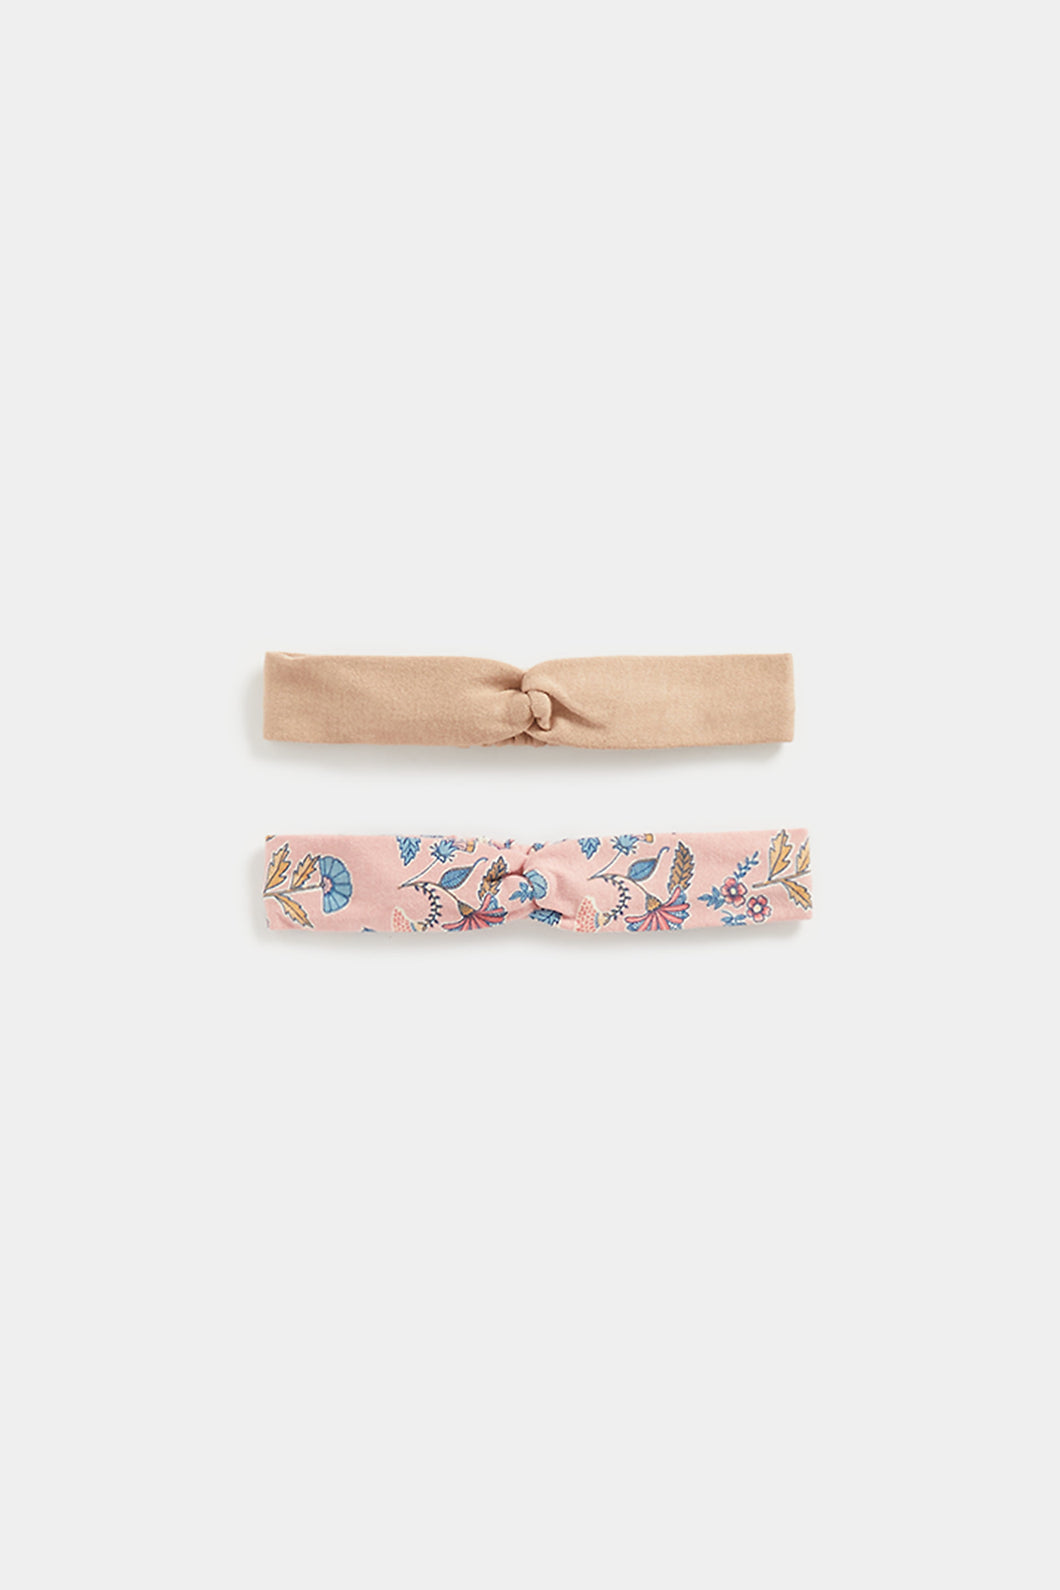 Mothercare Headbands - 2 Pack